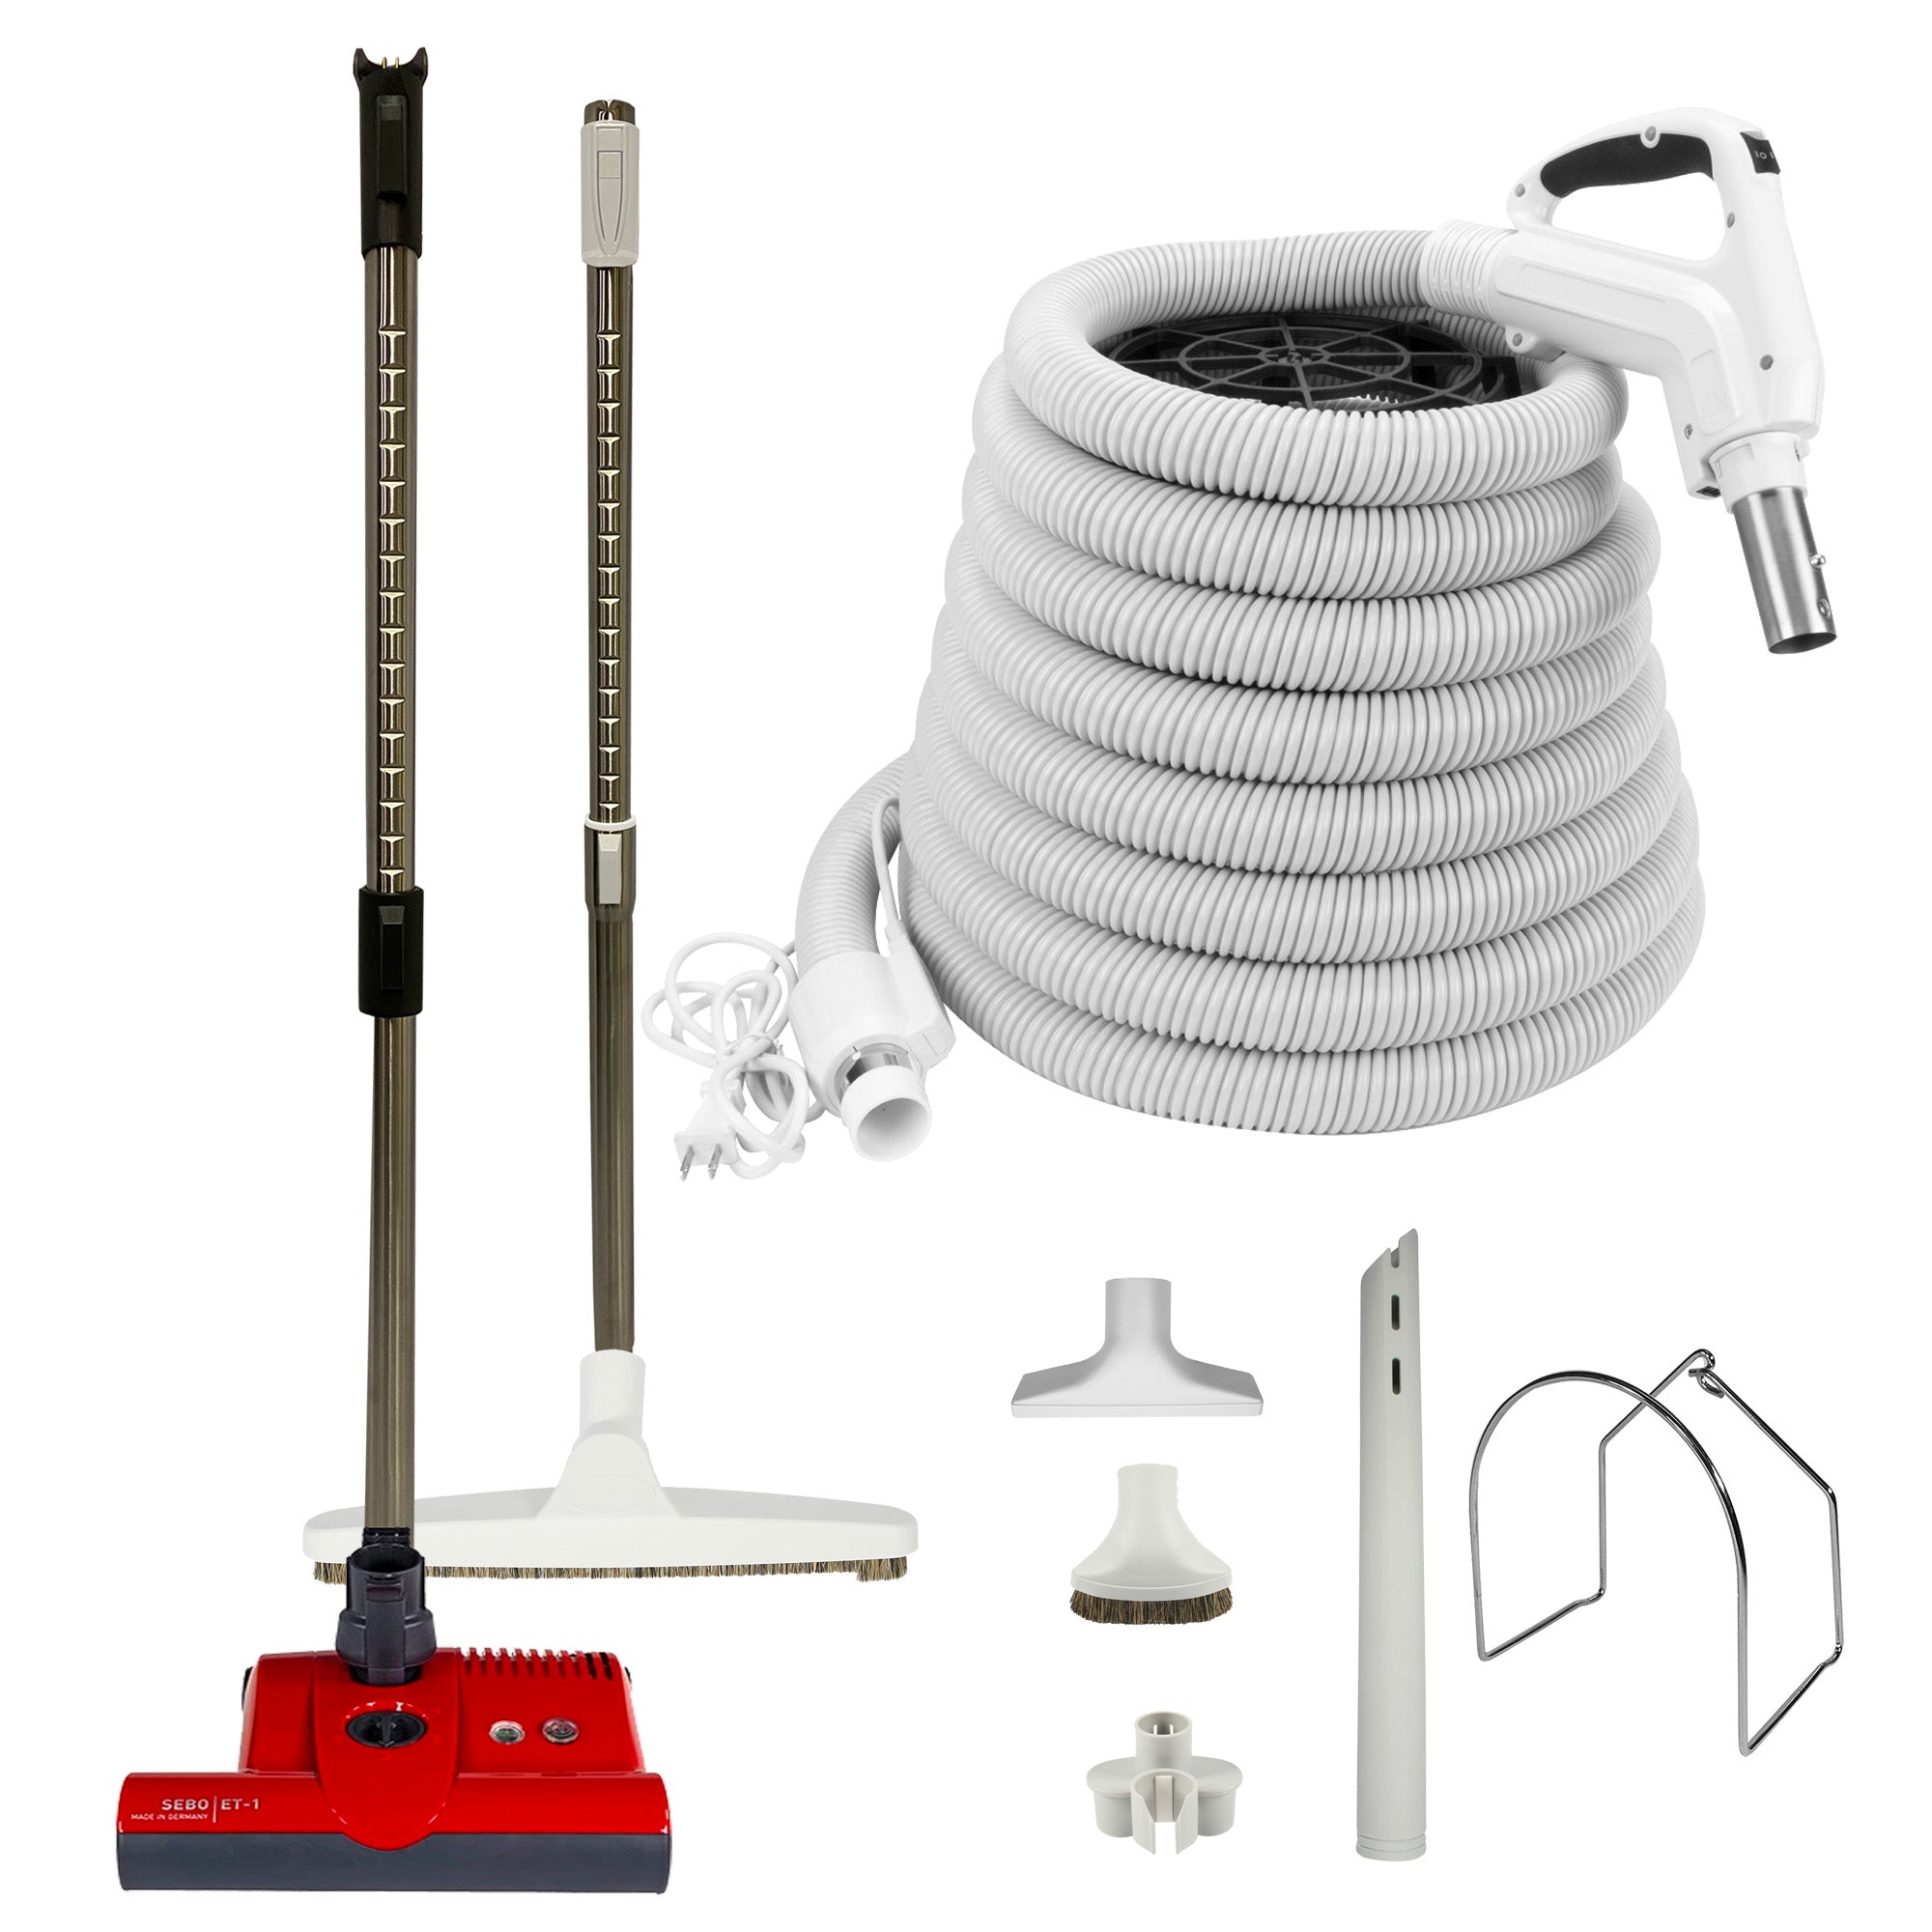 VPC Central Vacuum Accessory Kit with White Hose and SEBO ET-1 Powerhead - Red